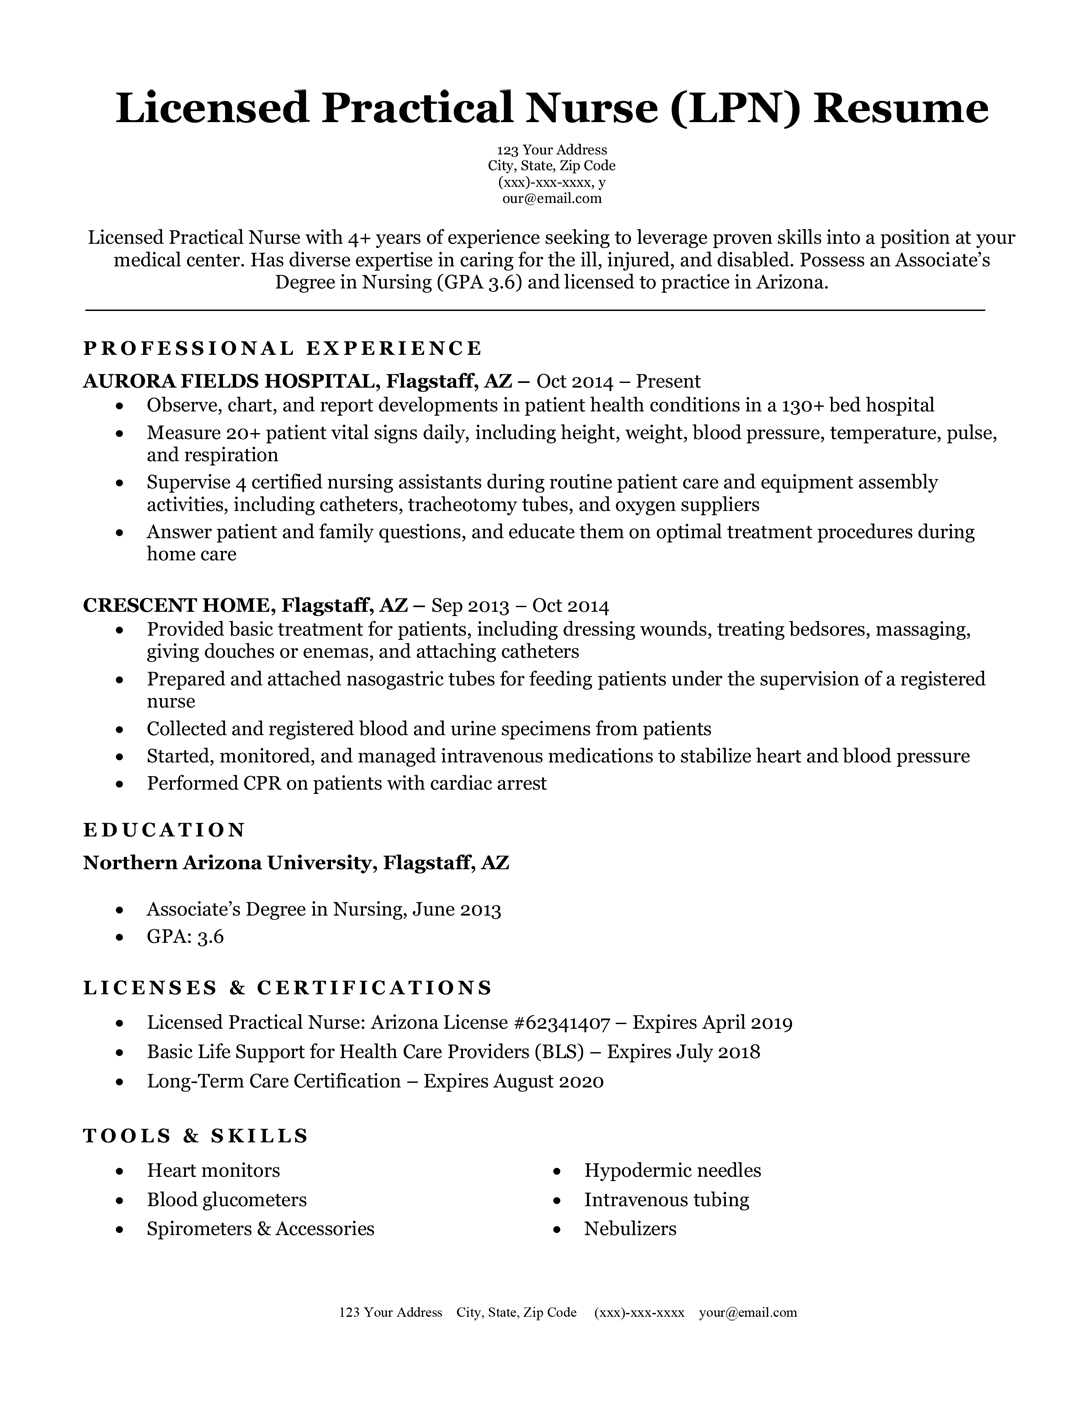 Licensed Practical Nurse Lpn Resume Sample Writing Tips Rc in proportions 1085 X 1404